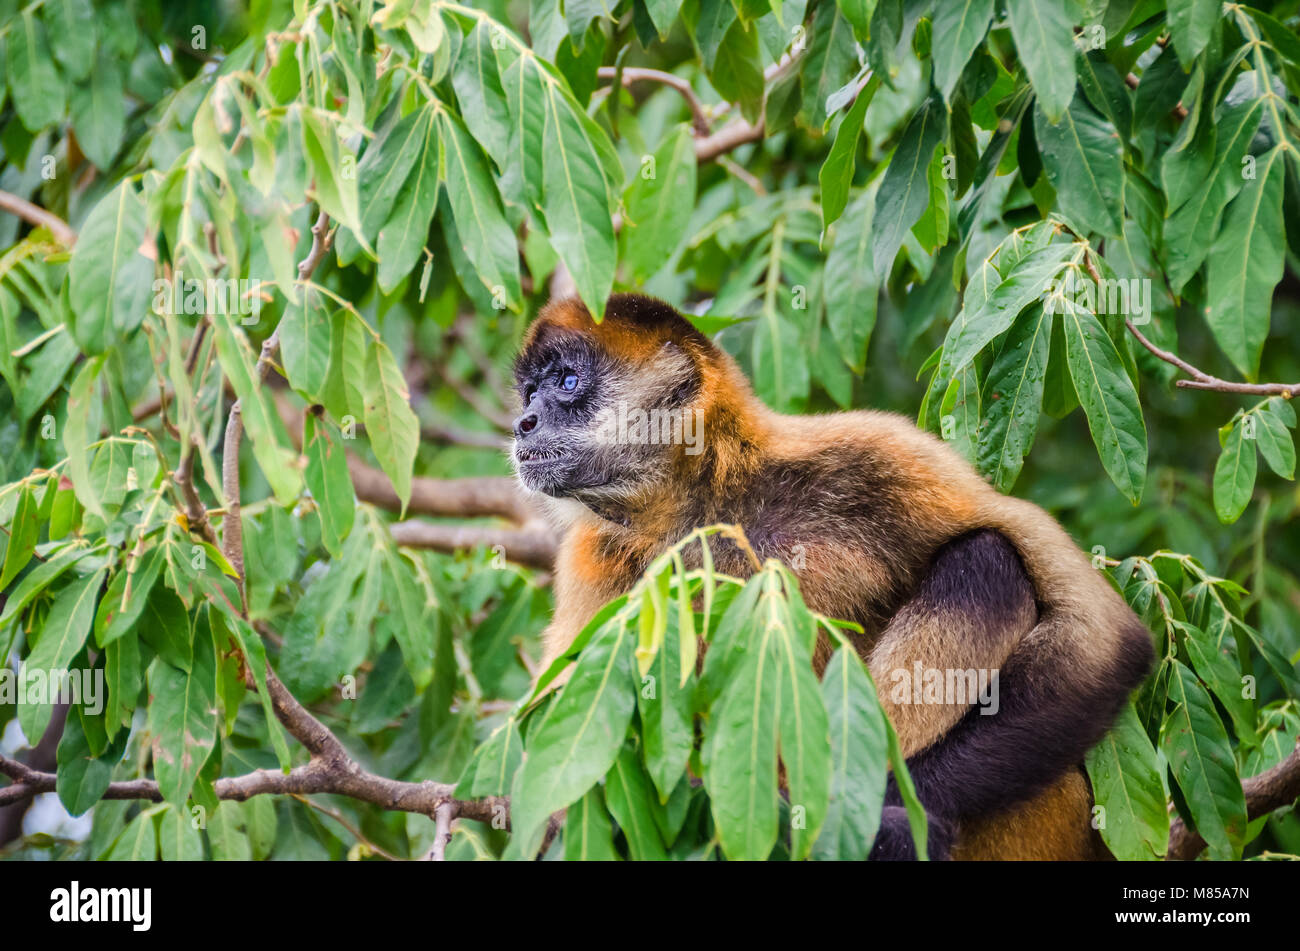 Geoffroy's spider monkey (Ateles geoffroyi ornatus), also known as the black-handed spider monkey, the largest New World monkeys sitting on a tree Stock Photo